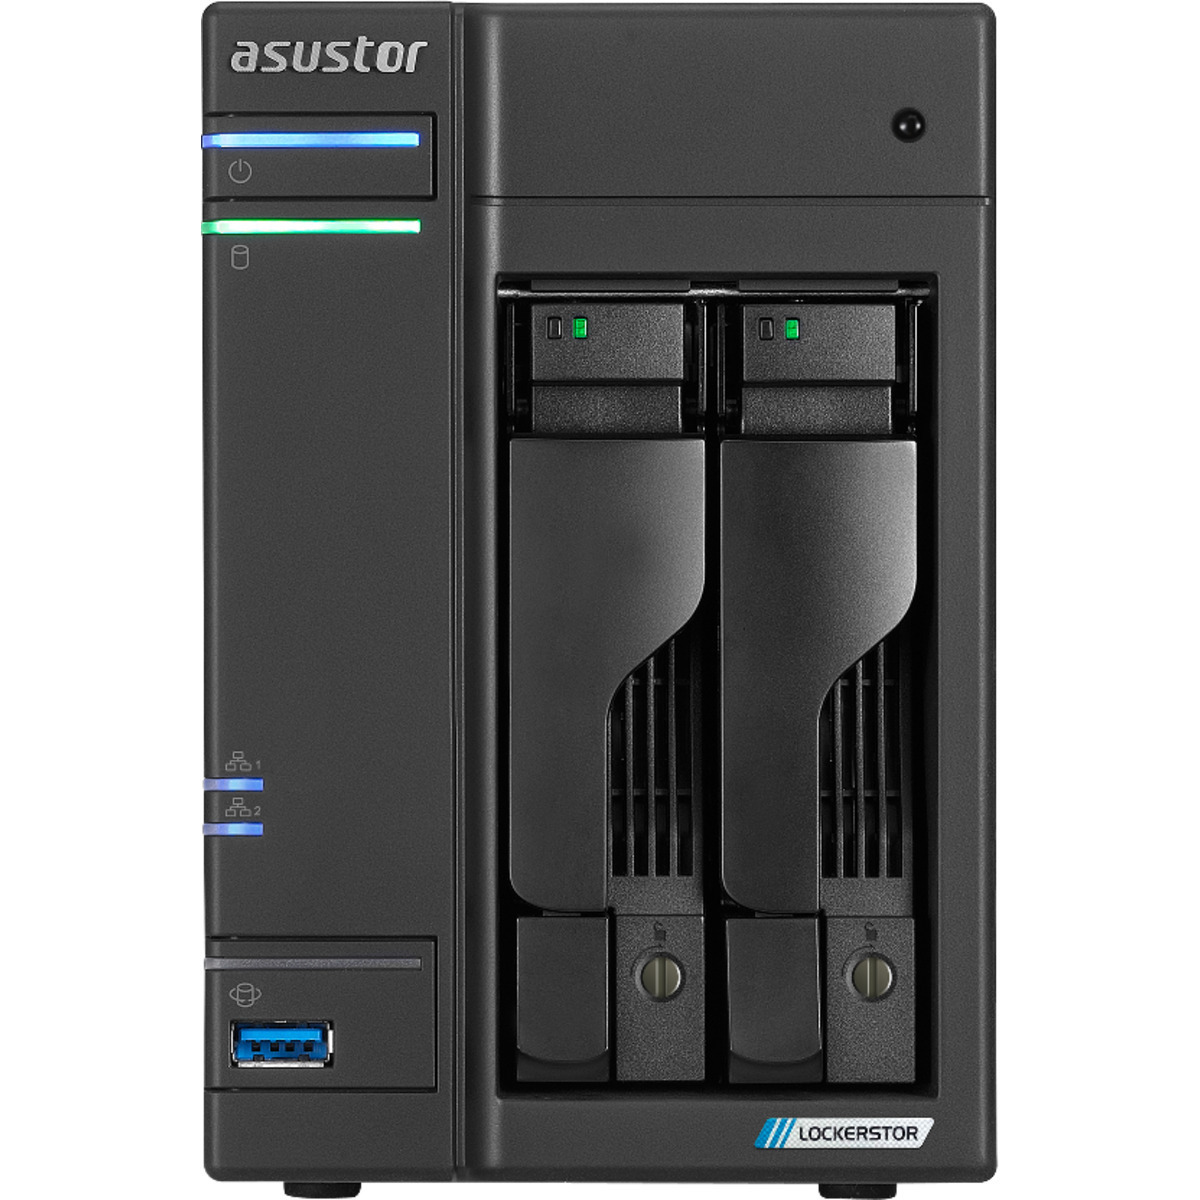 buy $740 ASUSTOR LOCKERSTOR 2 Gen2 AS6702T 2tb Desktop NAS - Network Attached Storage Device 2x1000gb Samsung 870 QVO MZ-77Q1T0 2.5 560/530MB/s SATA 6Gb/s SSD CONSUMER Class Drives Installed - Burn-In Tested - FREE RAM UPGRADE - nas headquarters buy network attached storage server device das new raid-5 free shipping usa LOCKERSTOR 2 Gen2 AS6702T